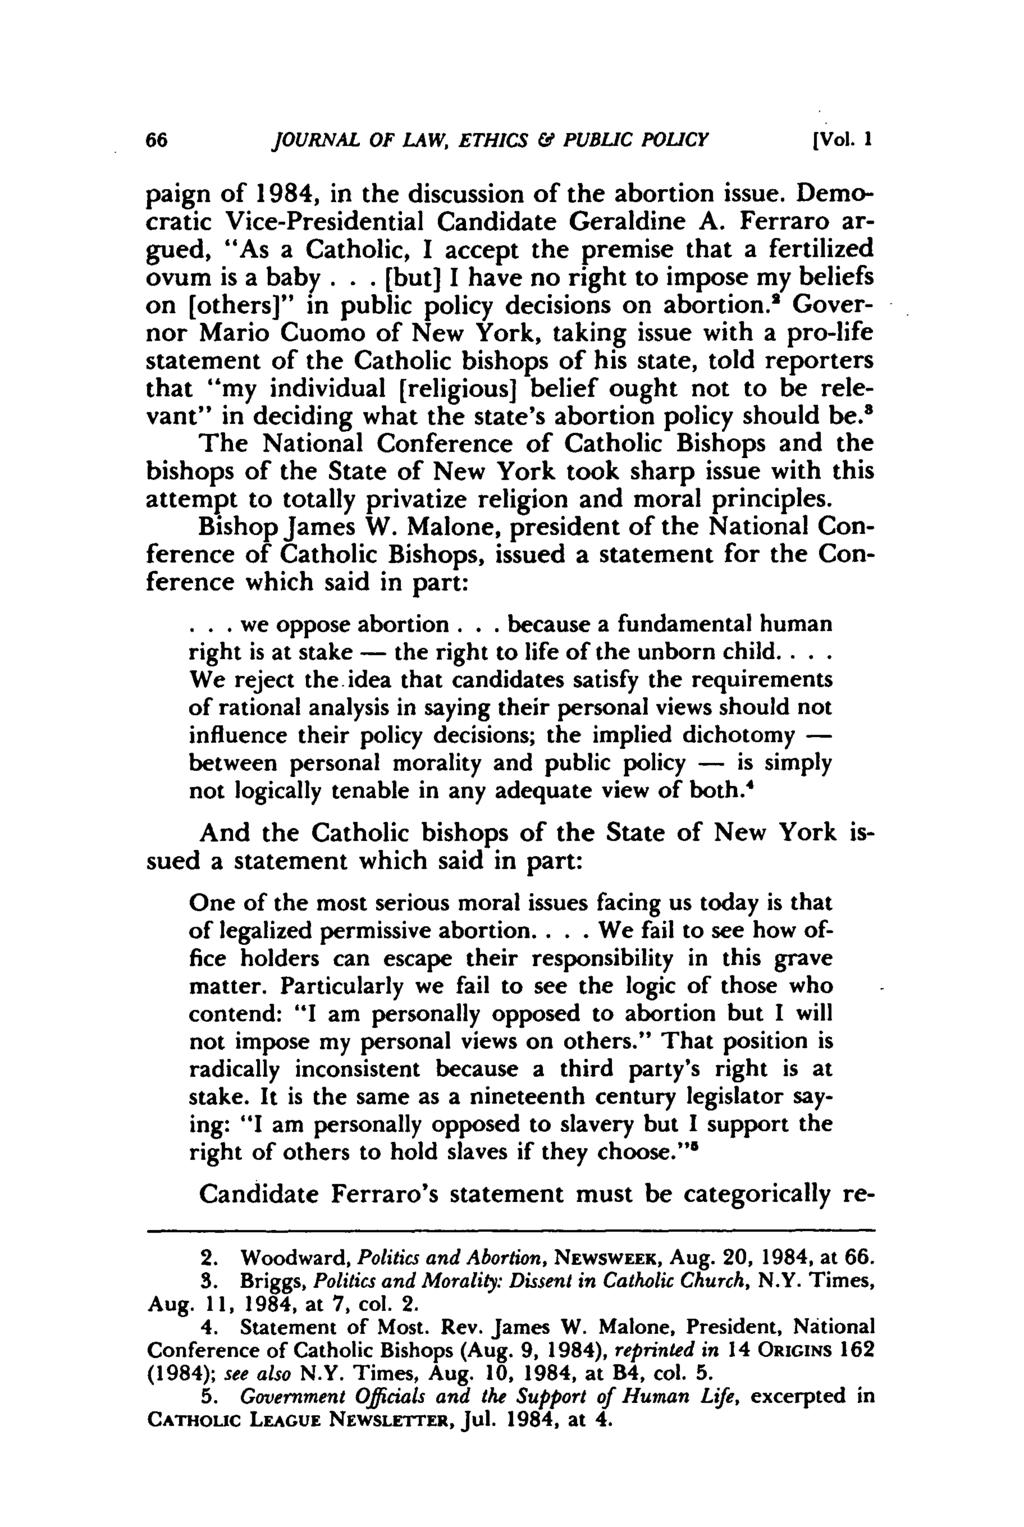 JOURNAL OF LAW, ETHICS & PUBLIC POLICY [Vol. I paign of 1984, in the discussion of the abortion issue. Democratic Vice-Presidential Candidate Geraldine A.